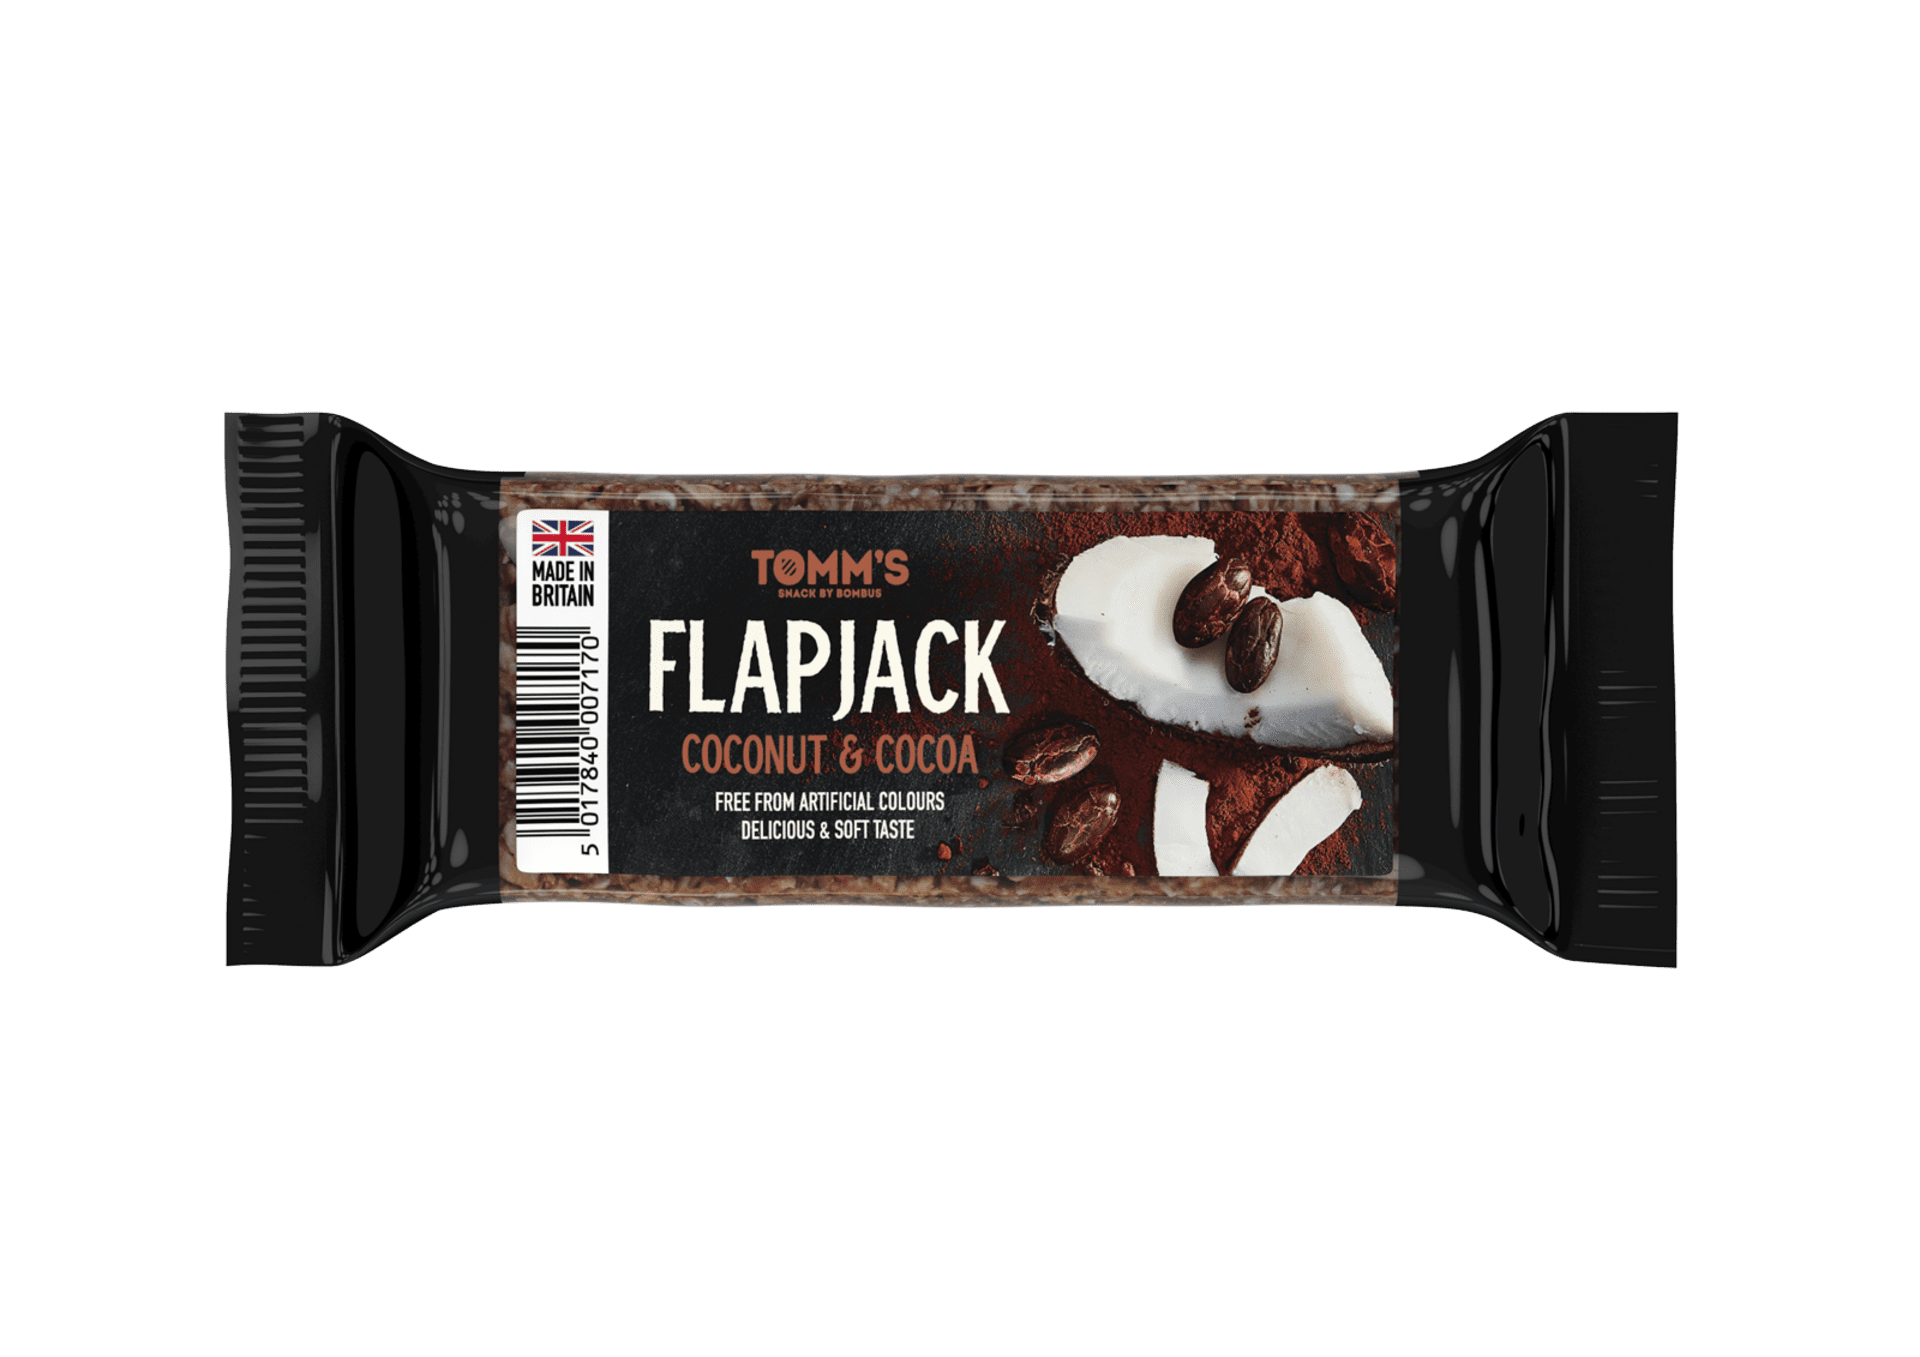 E-shop Bombus Flap Jack Tomm's Coconut and Cocoa 100 g